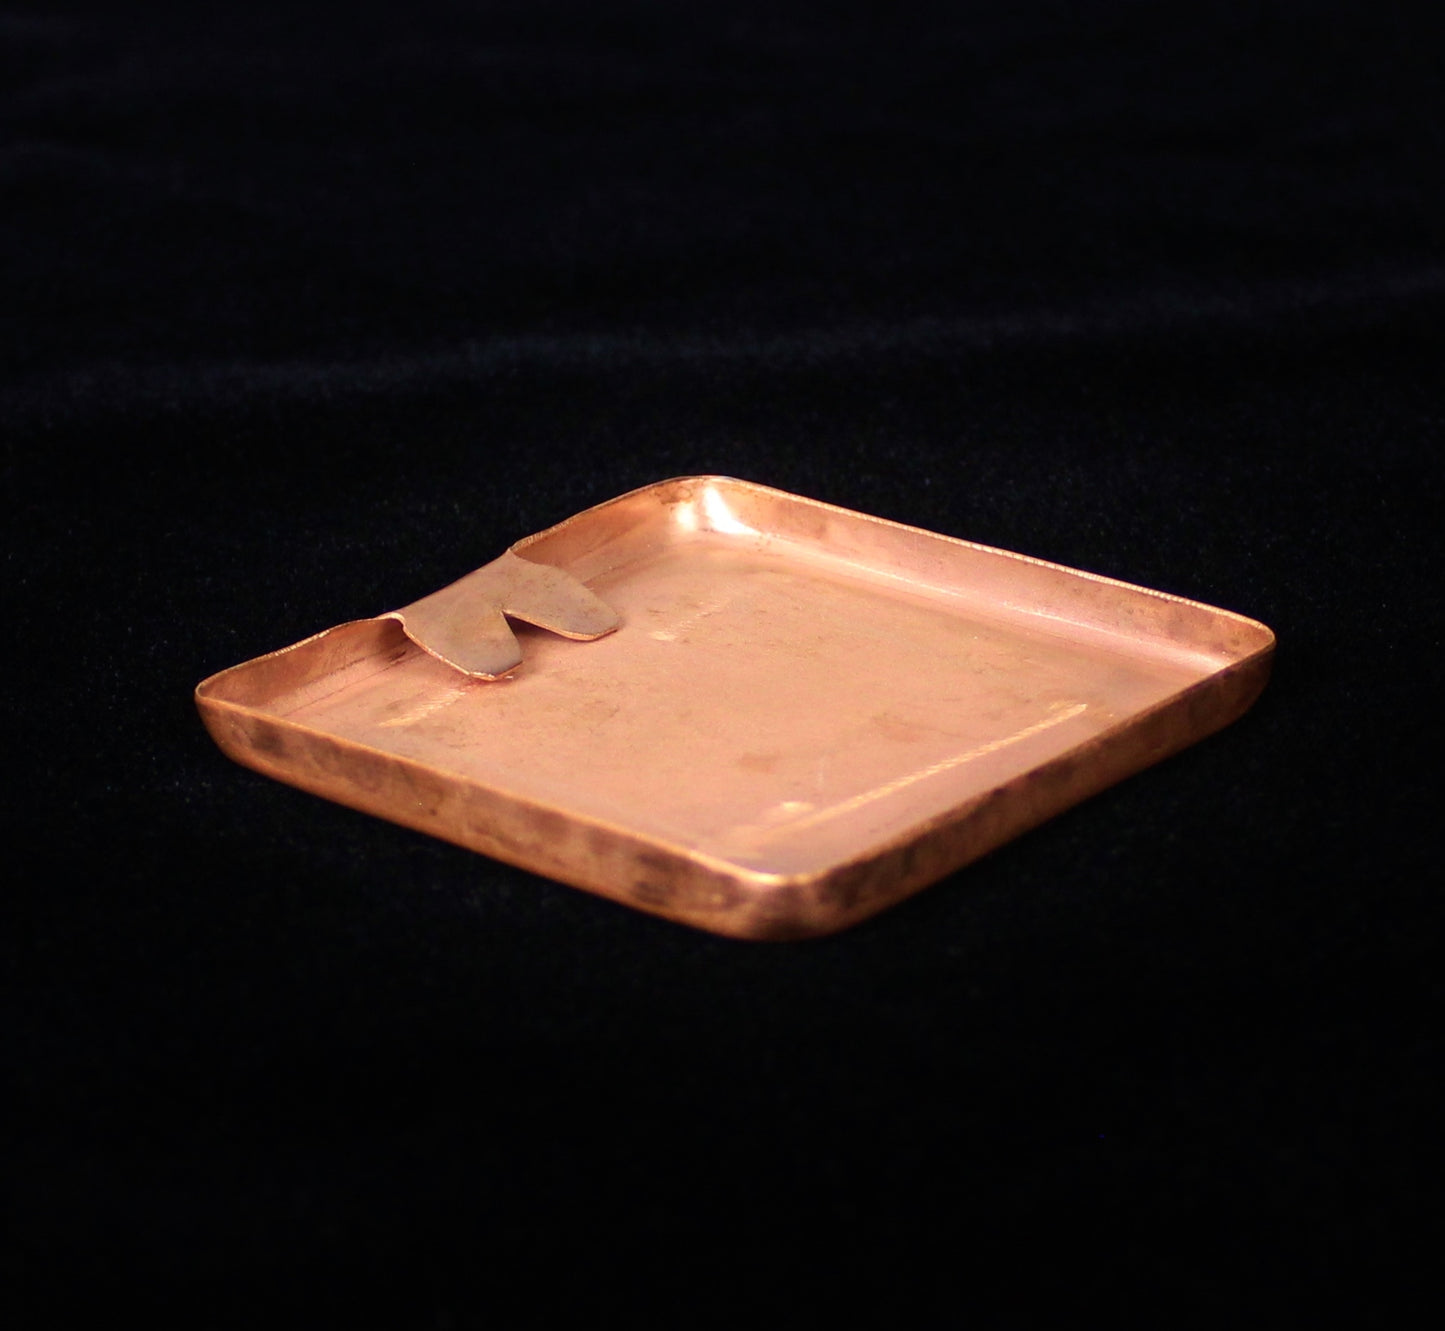 Blank Copper Tile, 3" x 3" x 1/4", Sold Individually